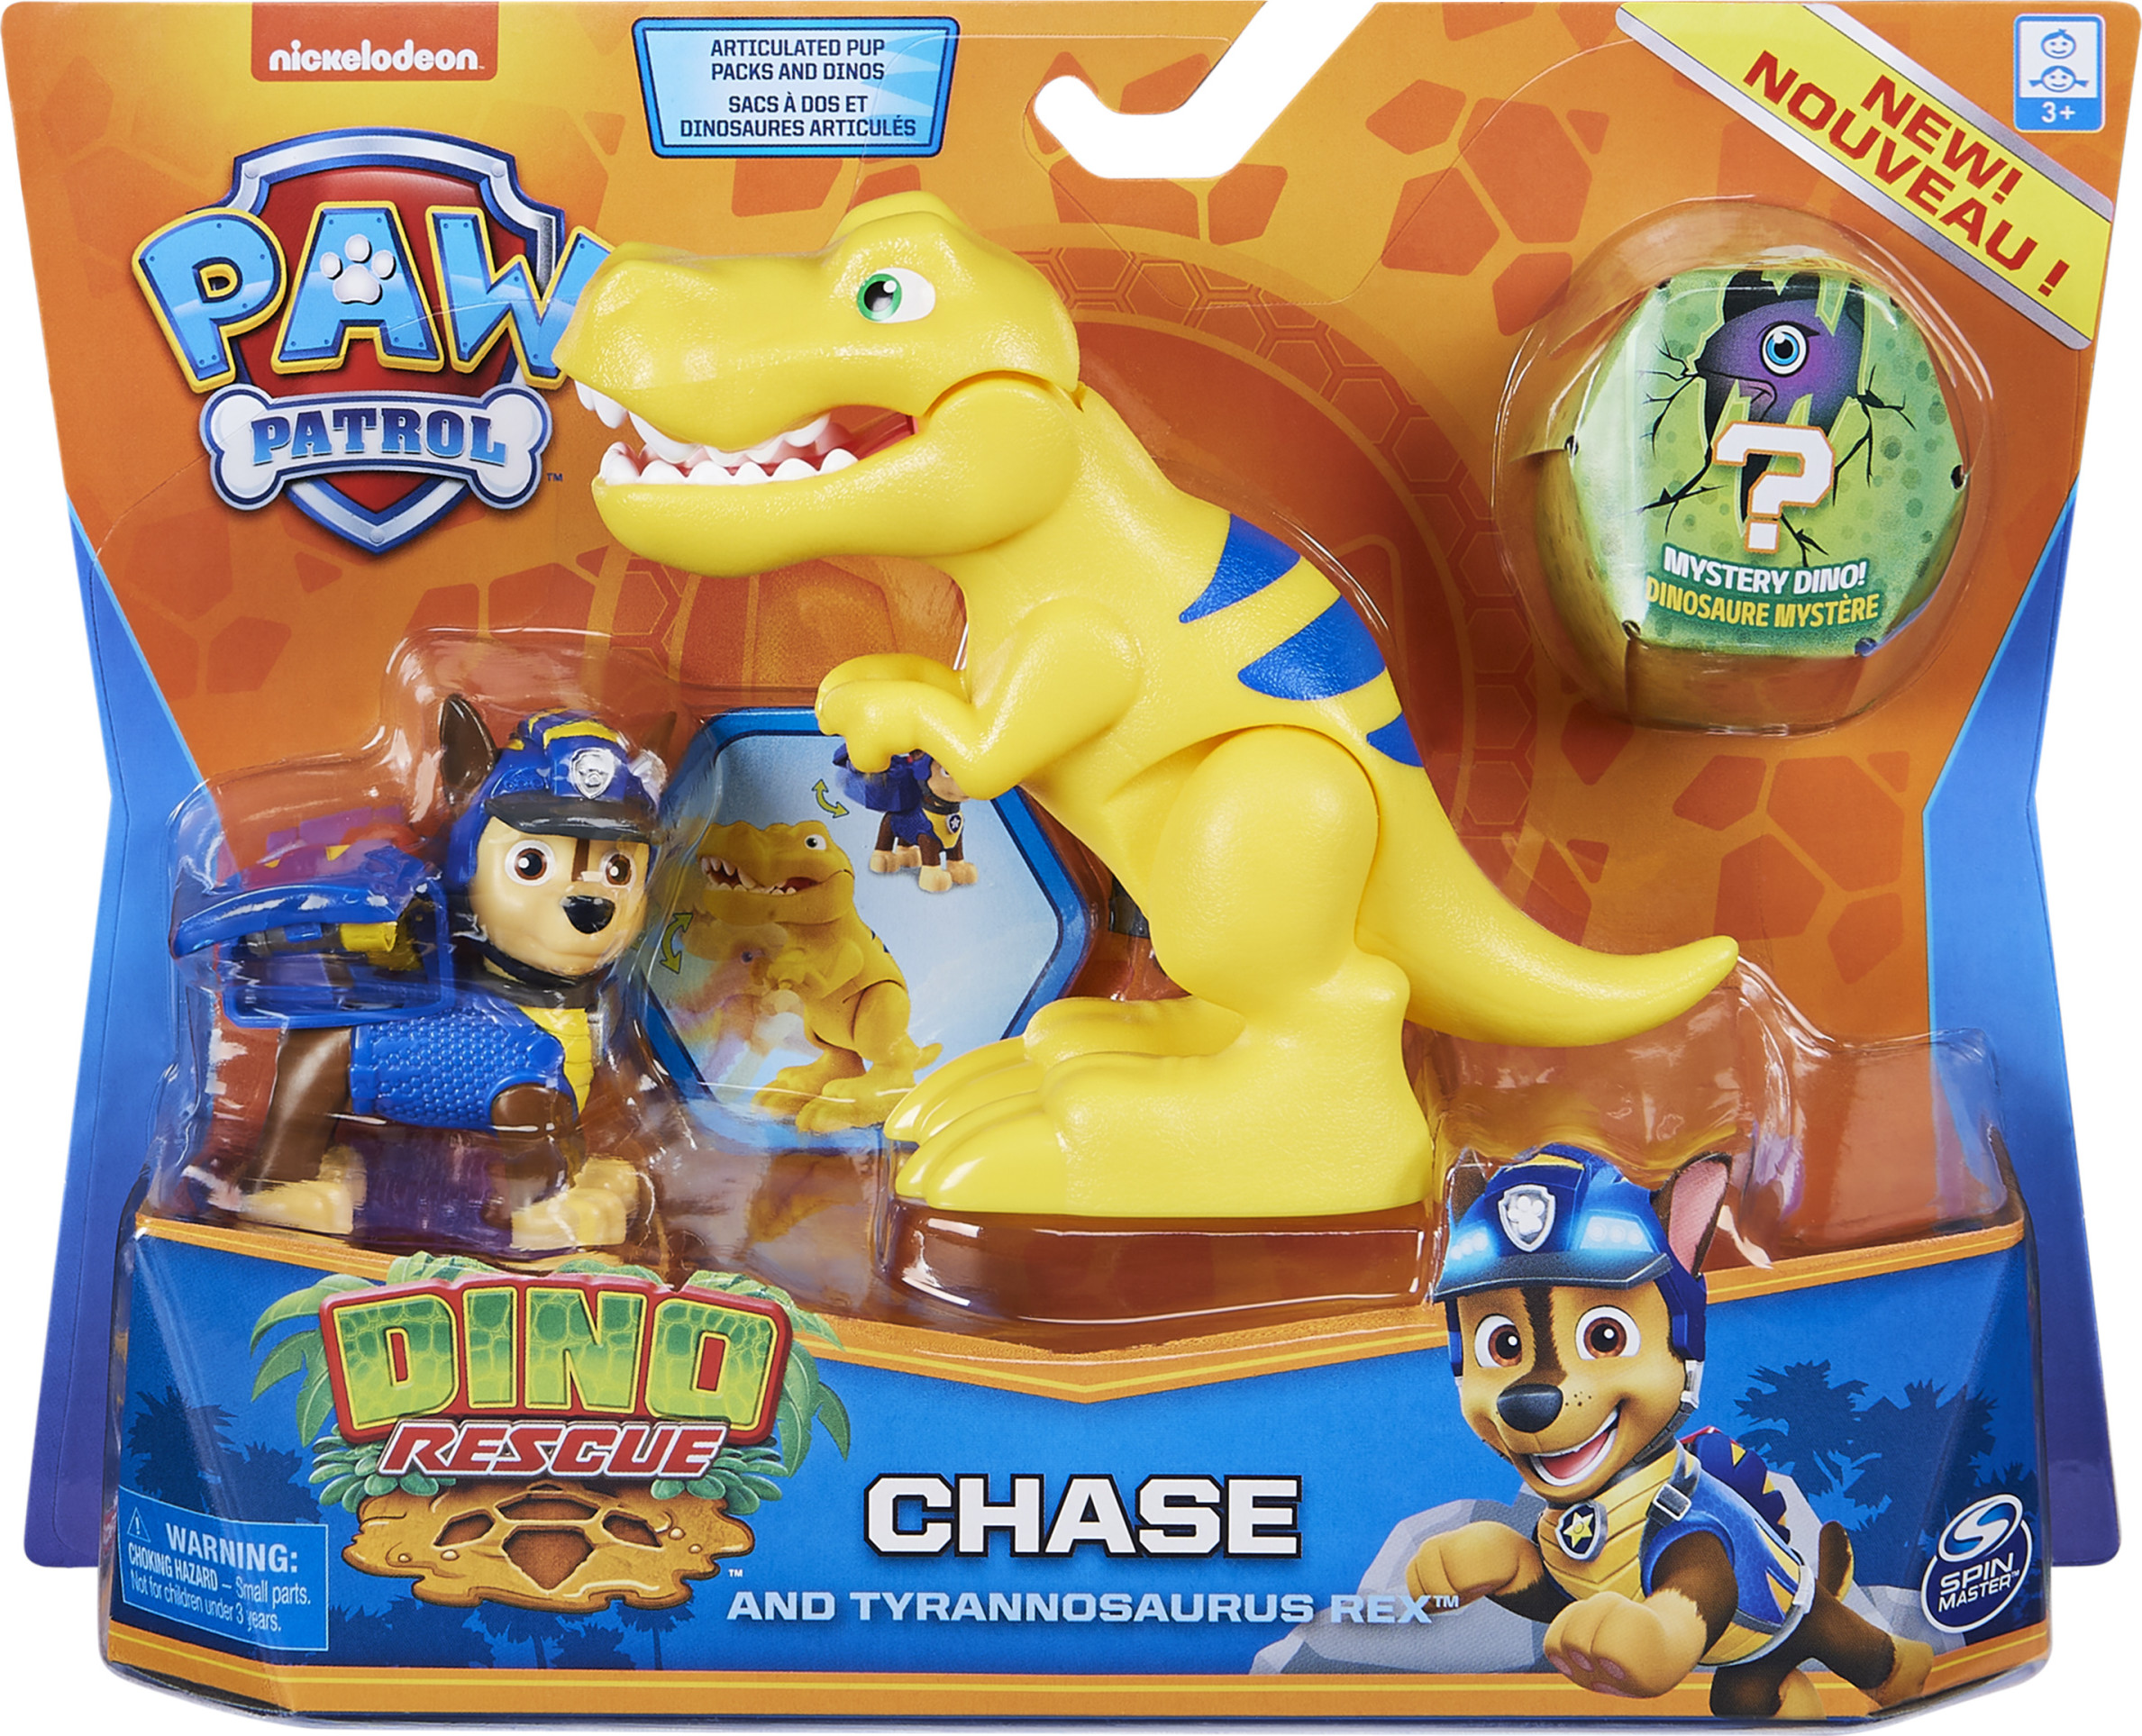 PAW Patrol, Dino Rescue Chase and Dinosaur Action Figure Set, for Kids Aged 3 and up - image 2 of 5